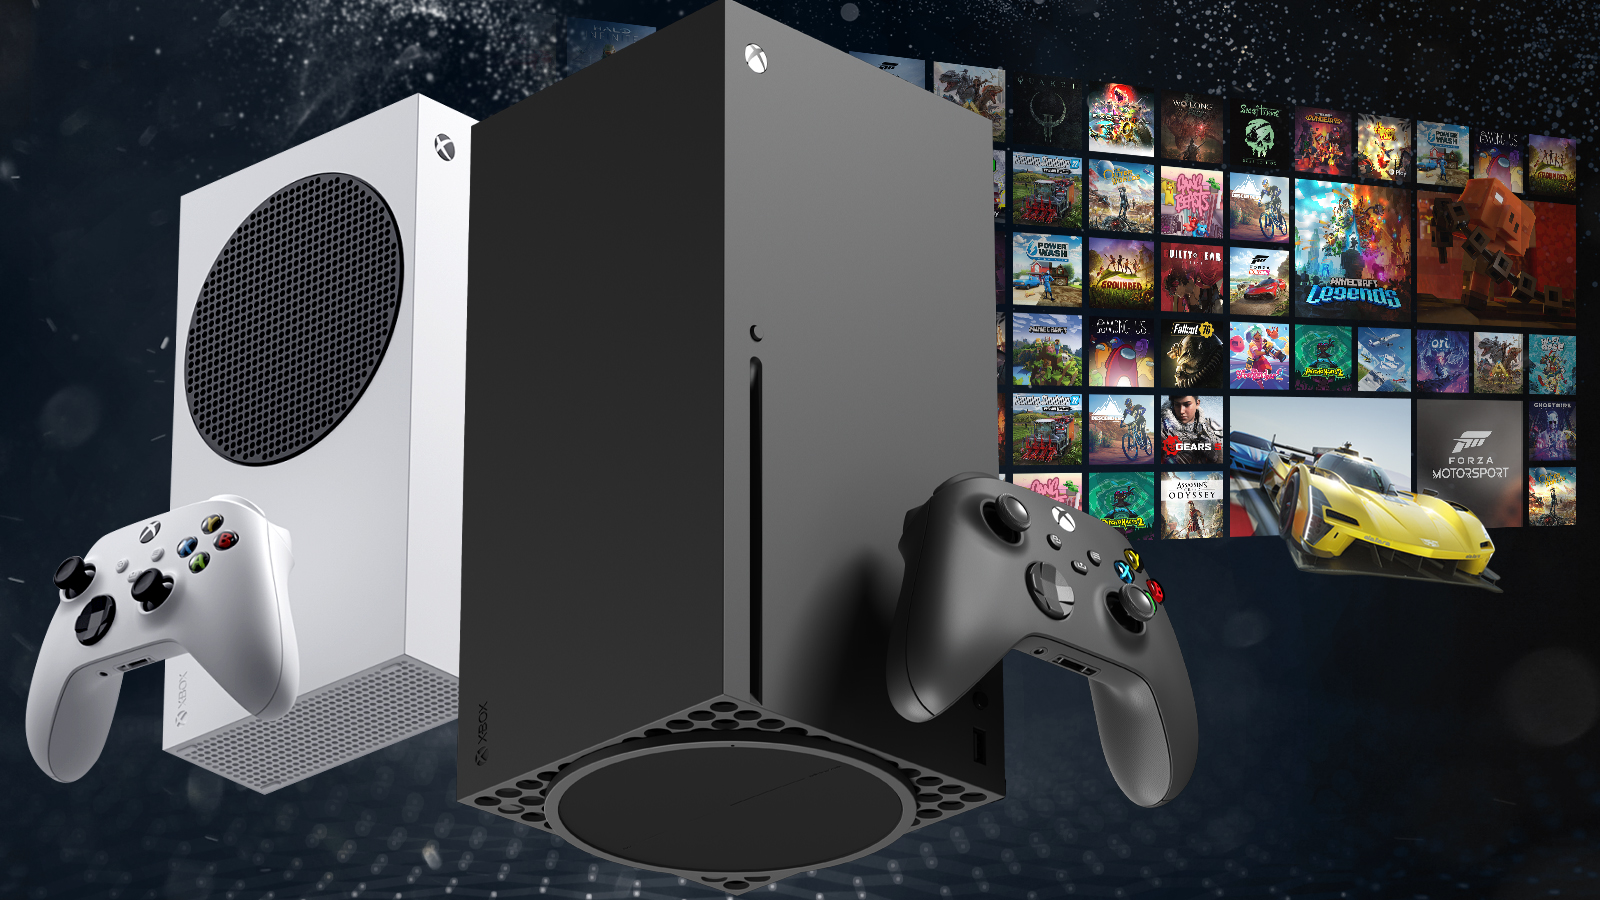 Xbox 2023 year-in-review recap stacks you up against other players